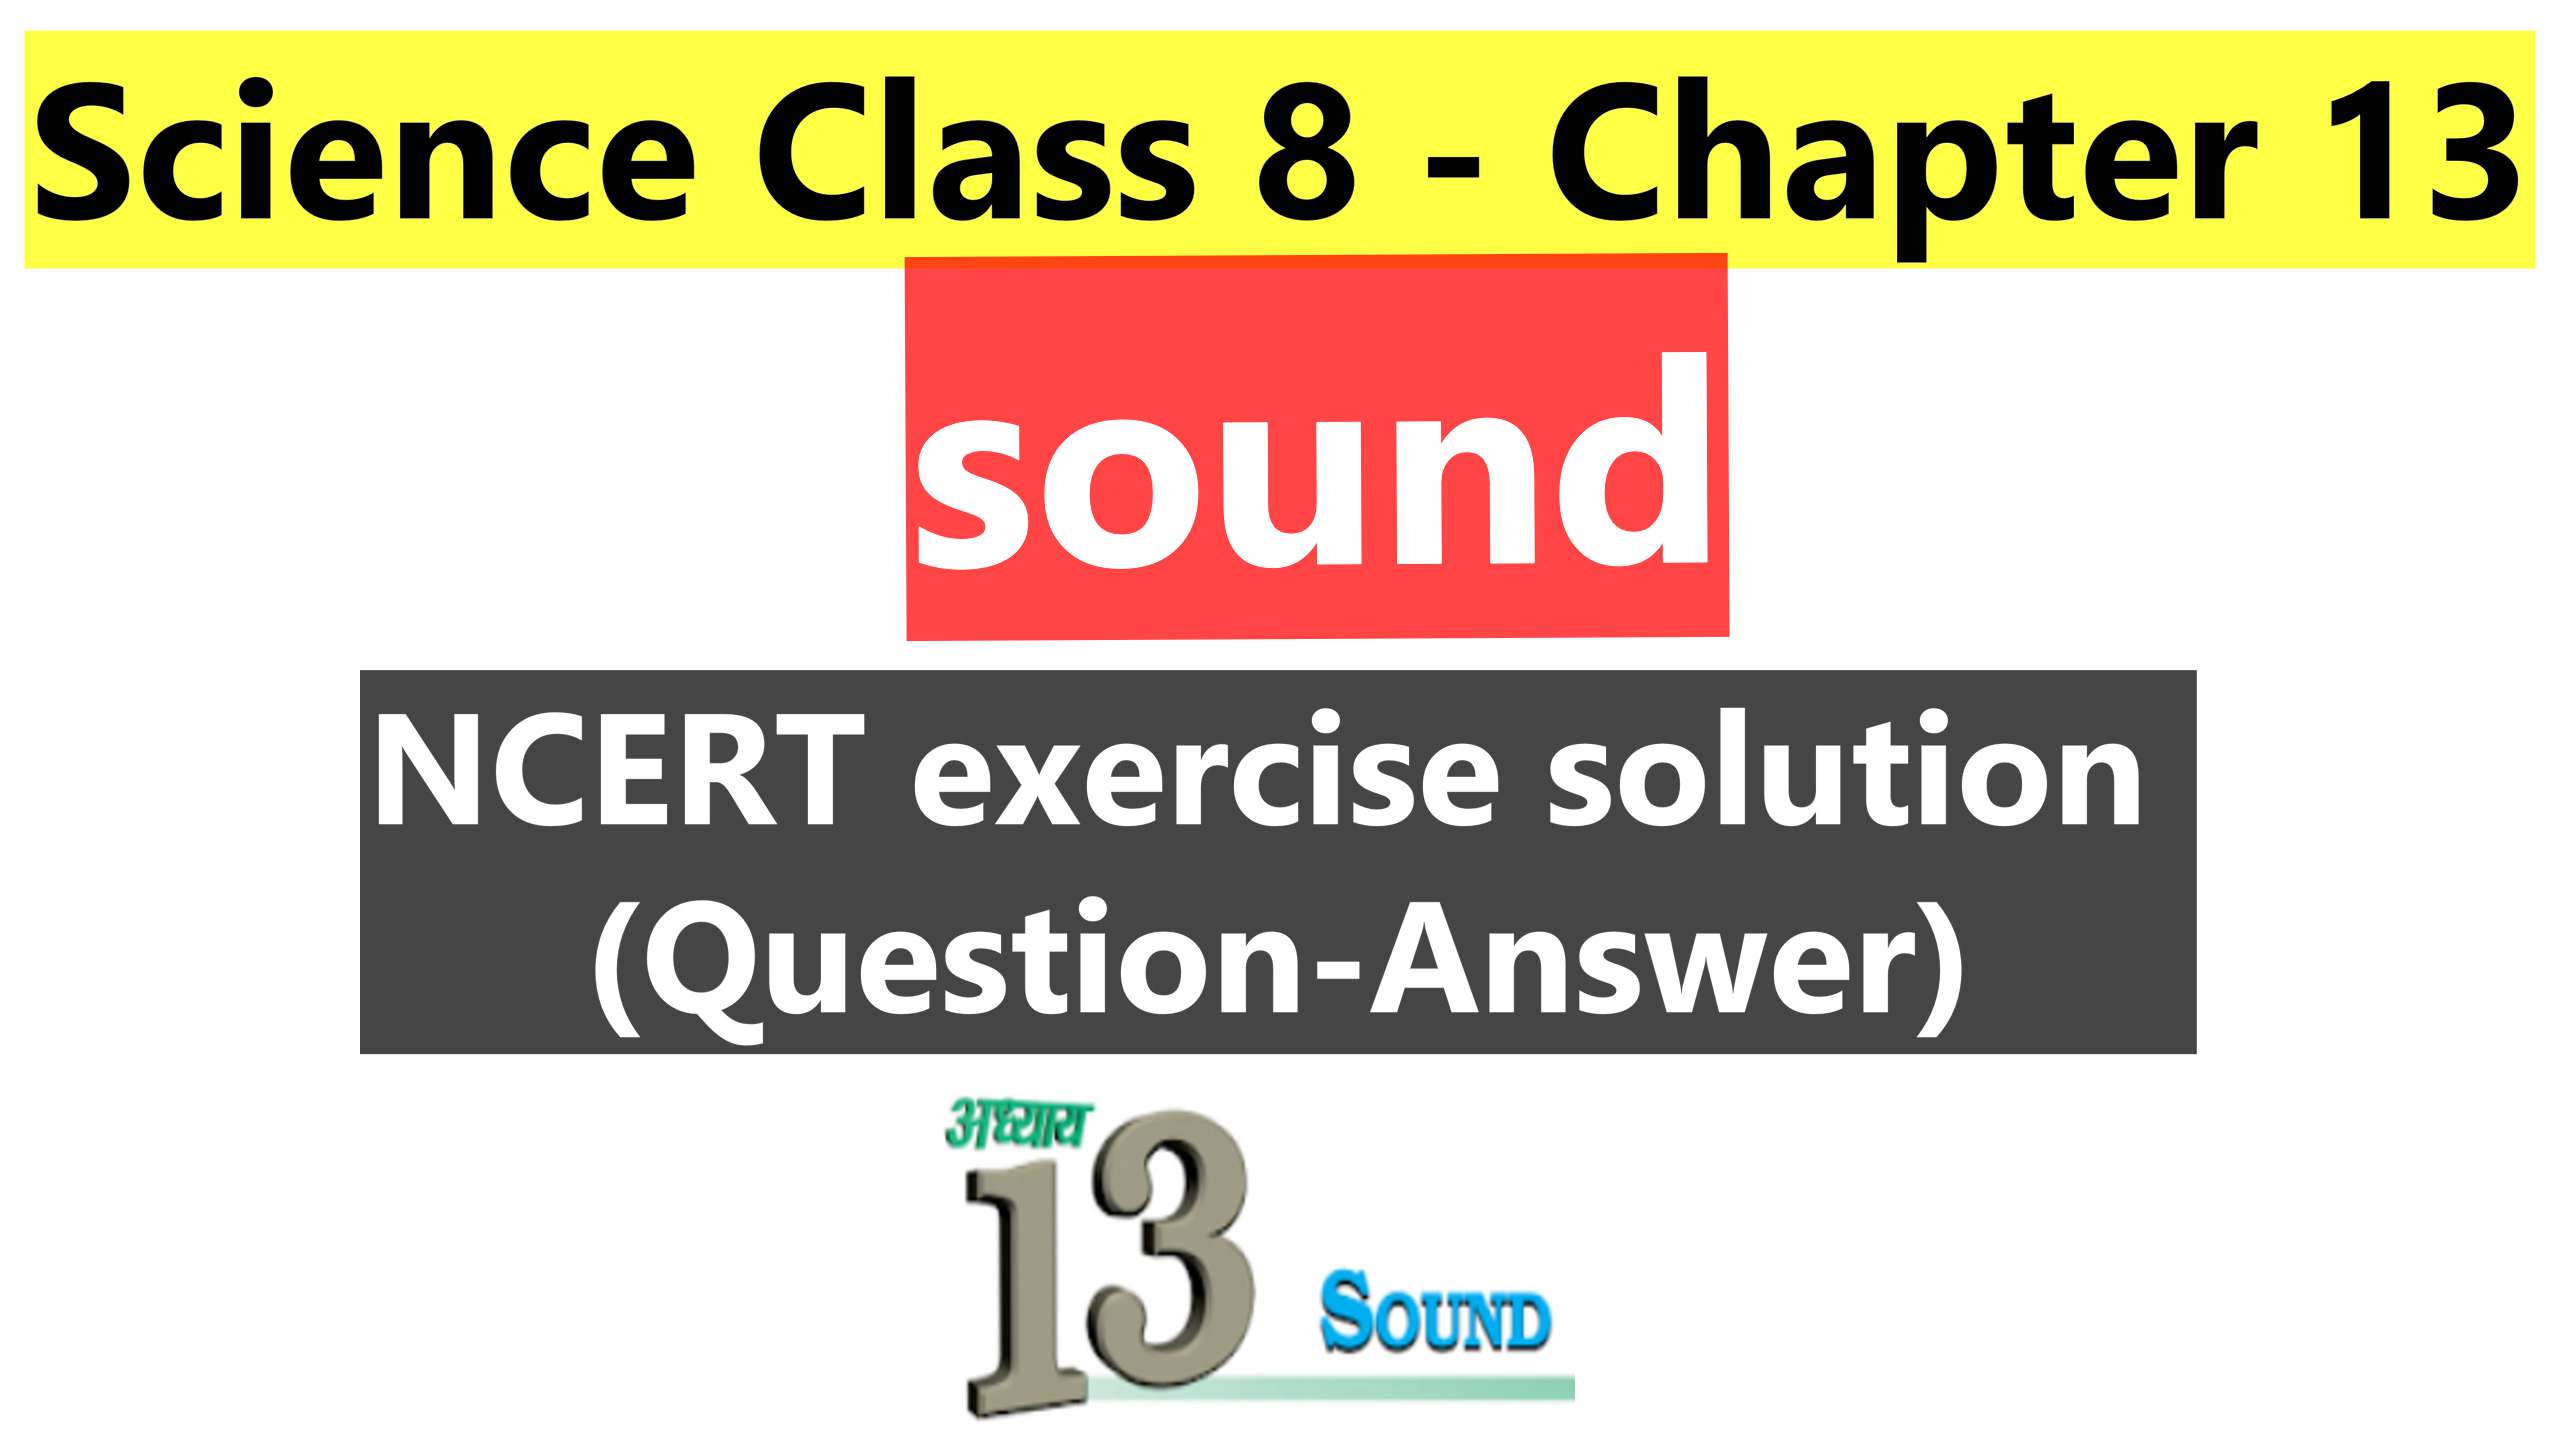 Science Class 8 - Chapter 13- sound - NCERT exercise solution (Question-Answer)